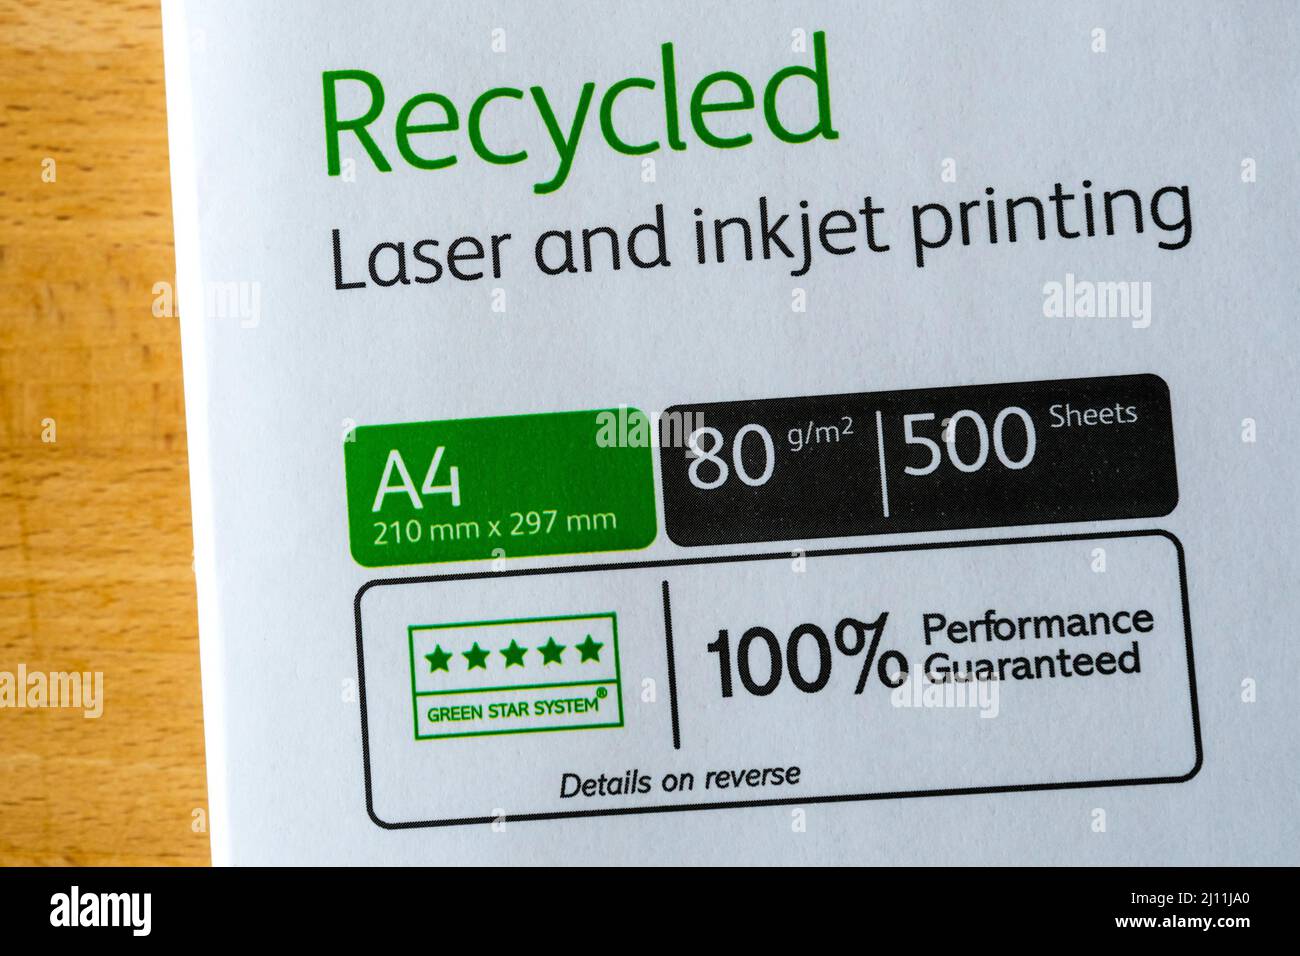 Label on a packet of recycled paper for laser and inkjet printing. Stock Photo